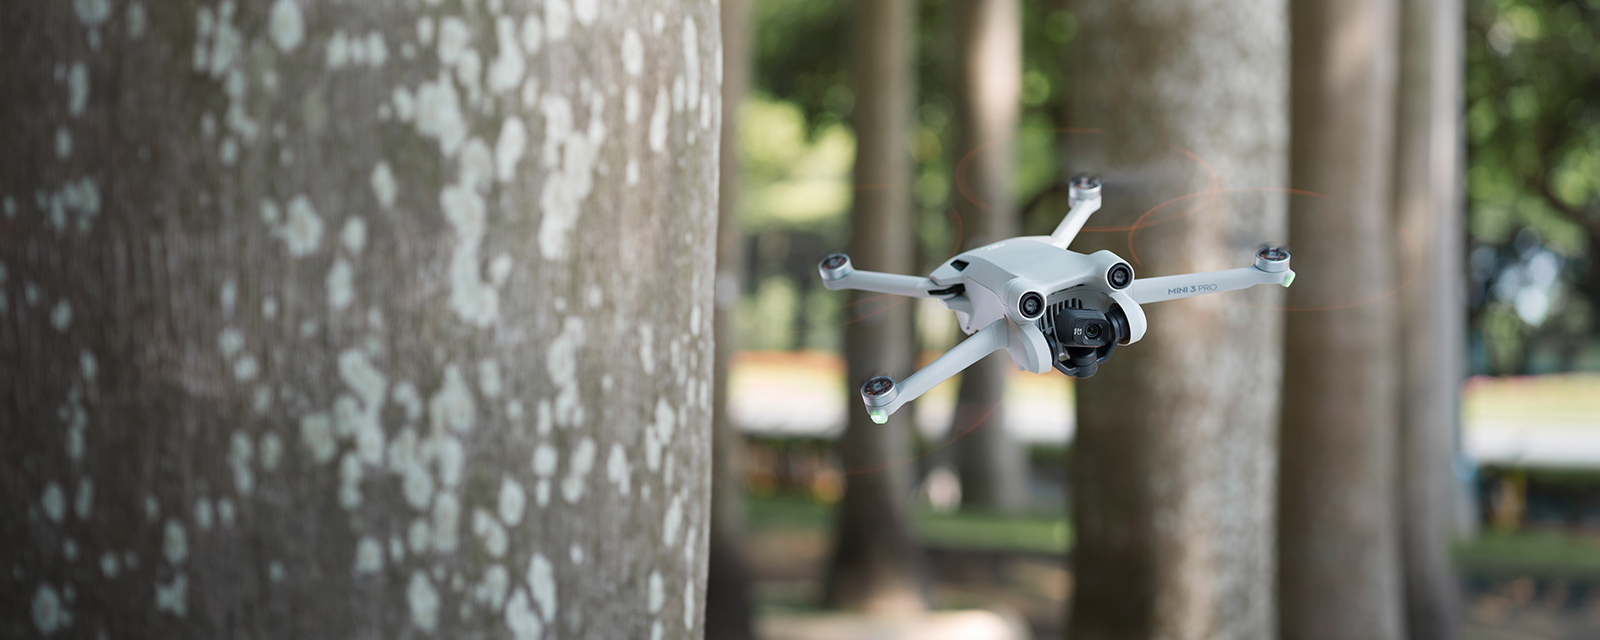 Born to Fly: New DJI Drone Incoming! | D1 Lounge